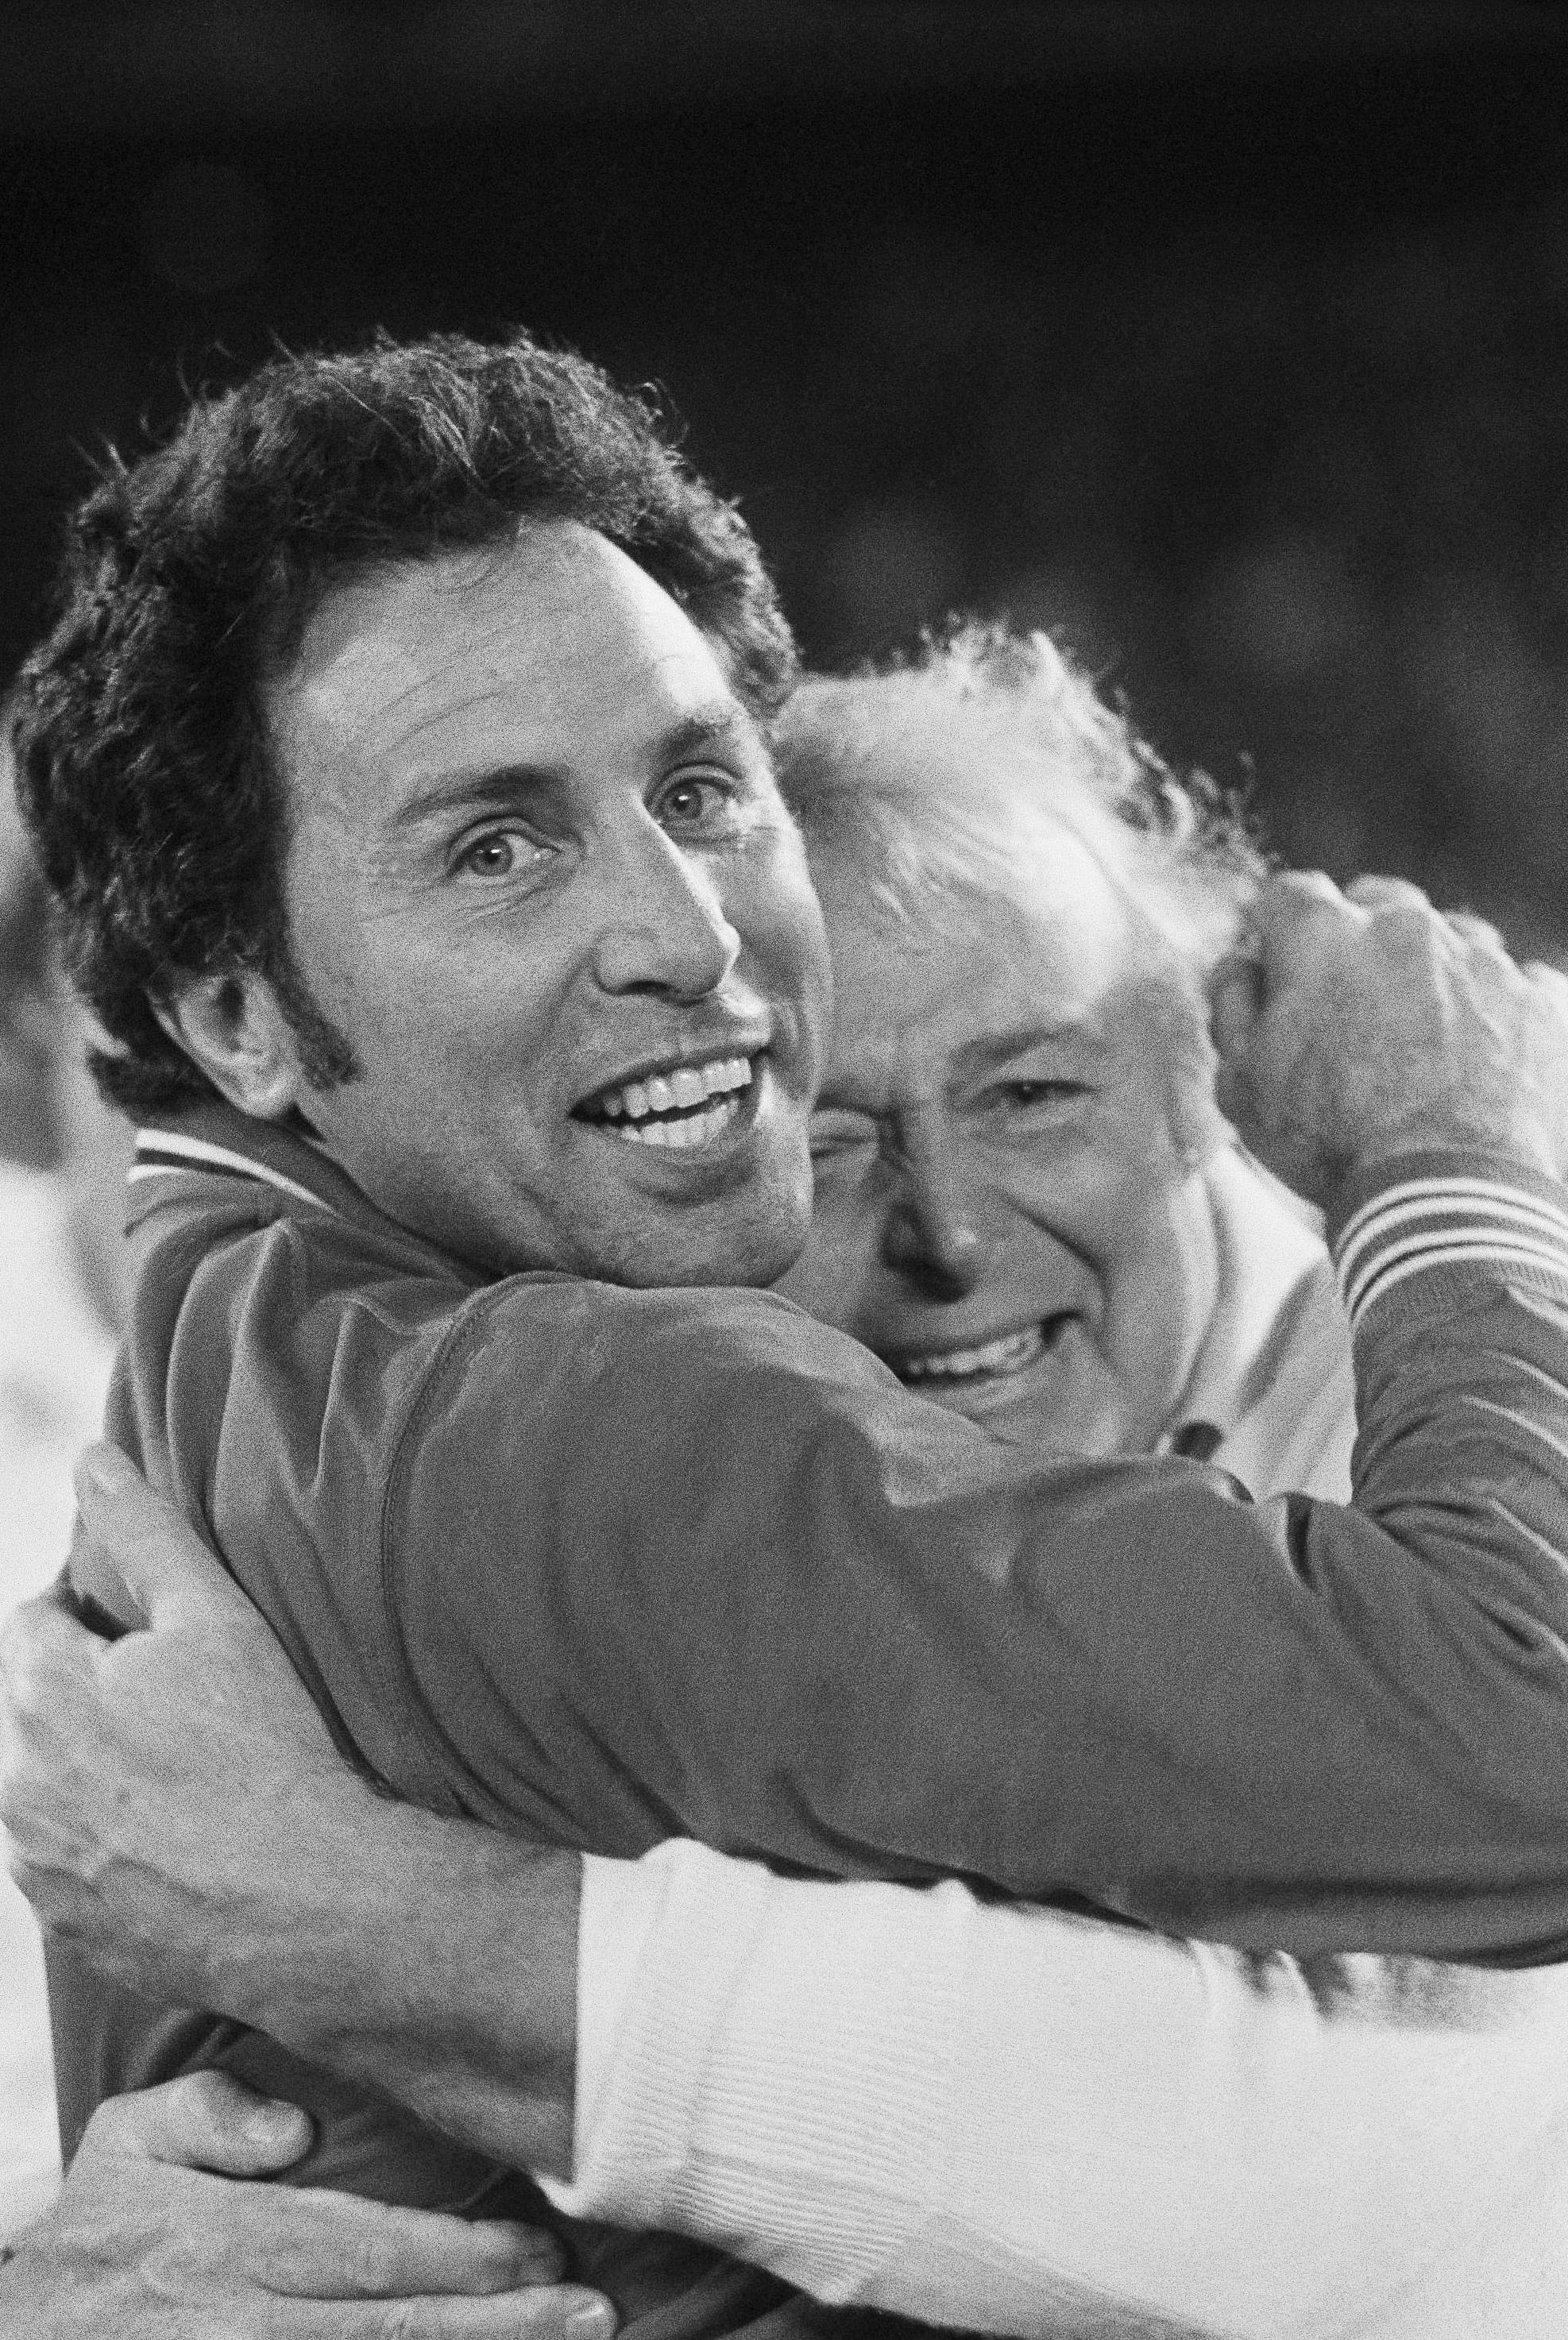 Indiana football, led by Lee Corso, stunned BYU in 1979 Holiday Bowl